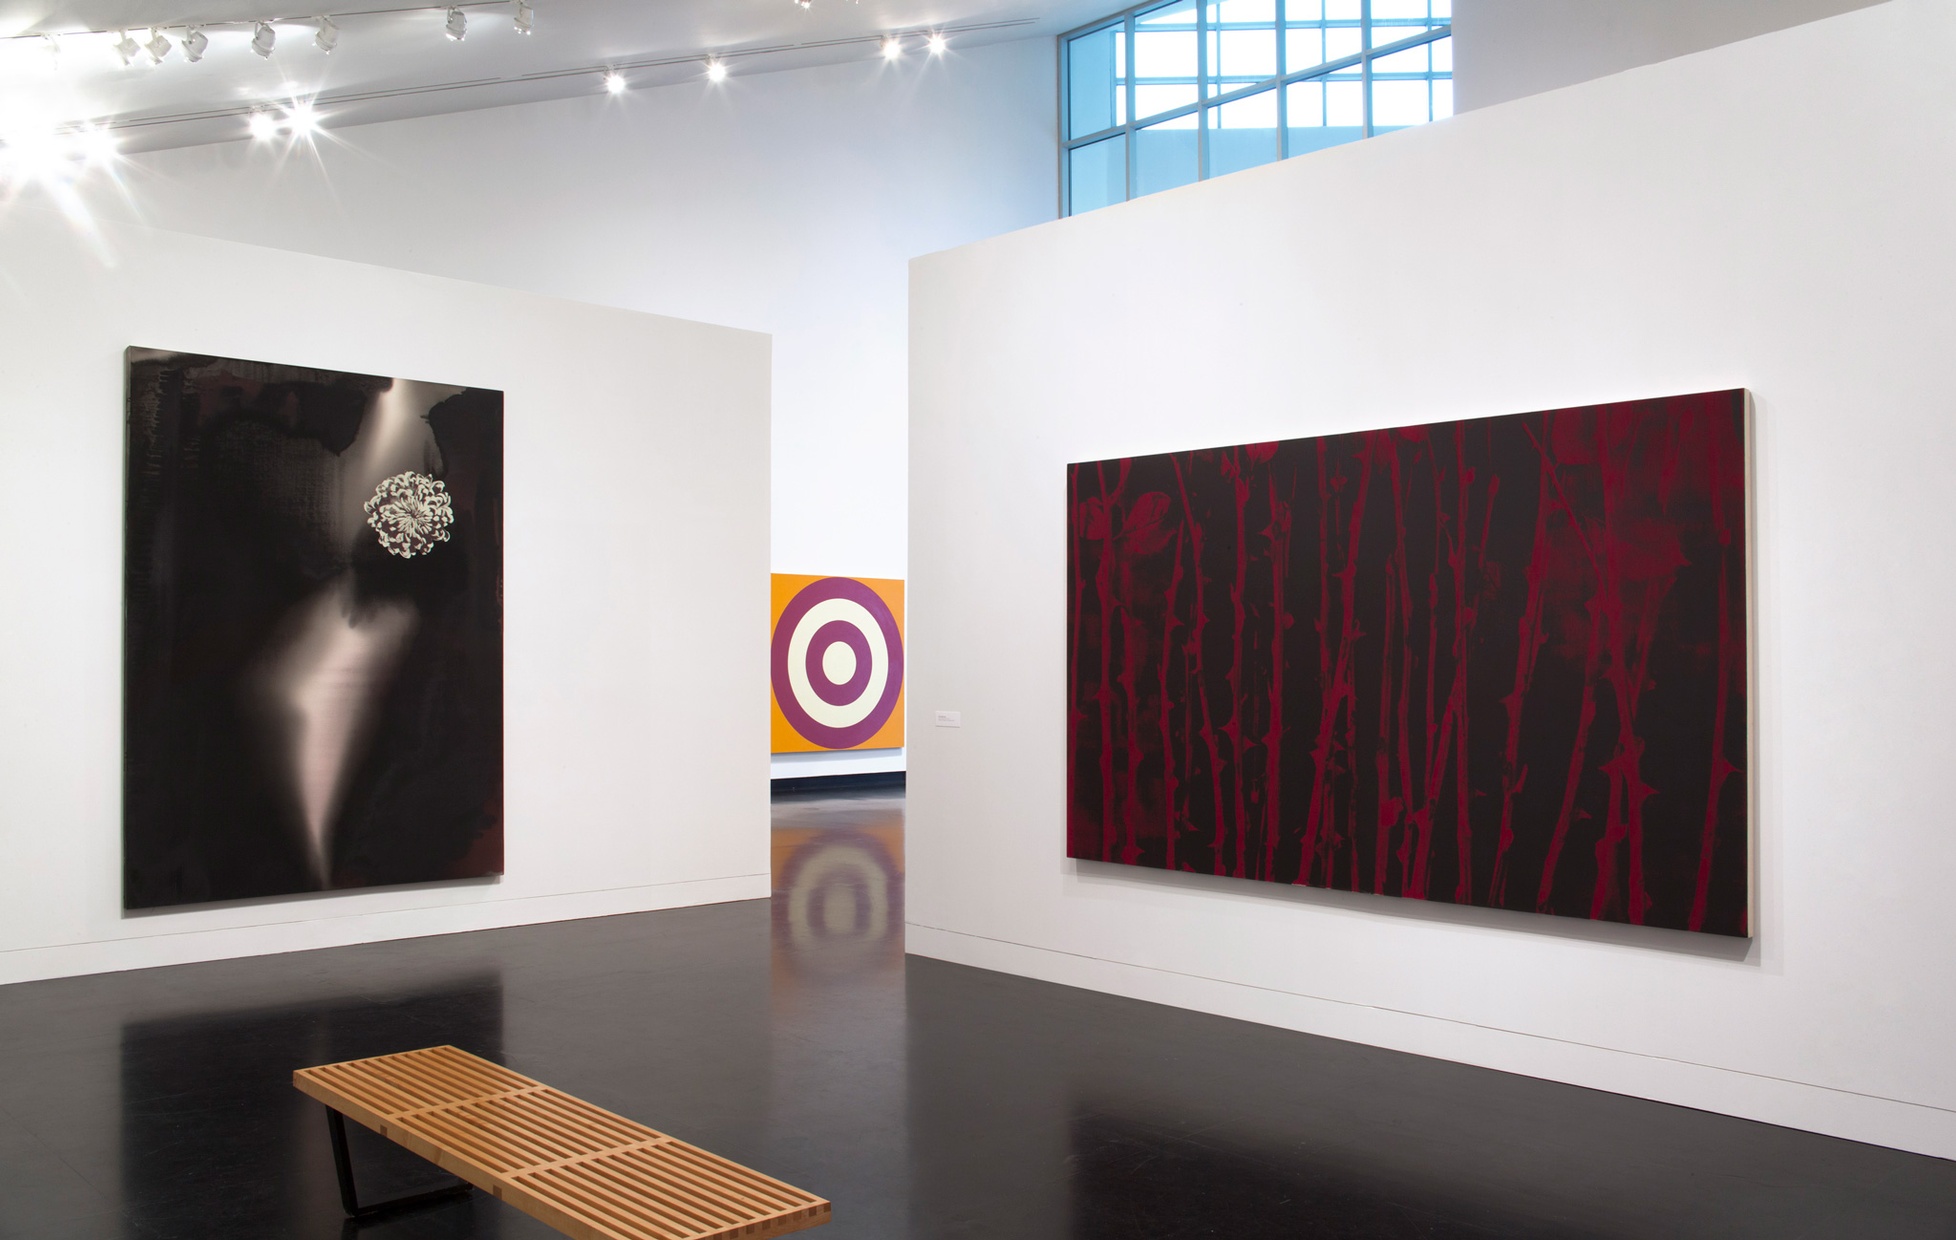 Two large paintings hang on white walls adjacent to each other. On the right, there is a large black painted with red stems and thorns, on the left there is a large black painting with an image of a white flower.